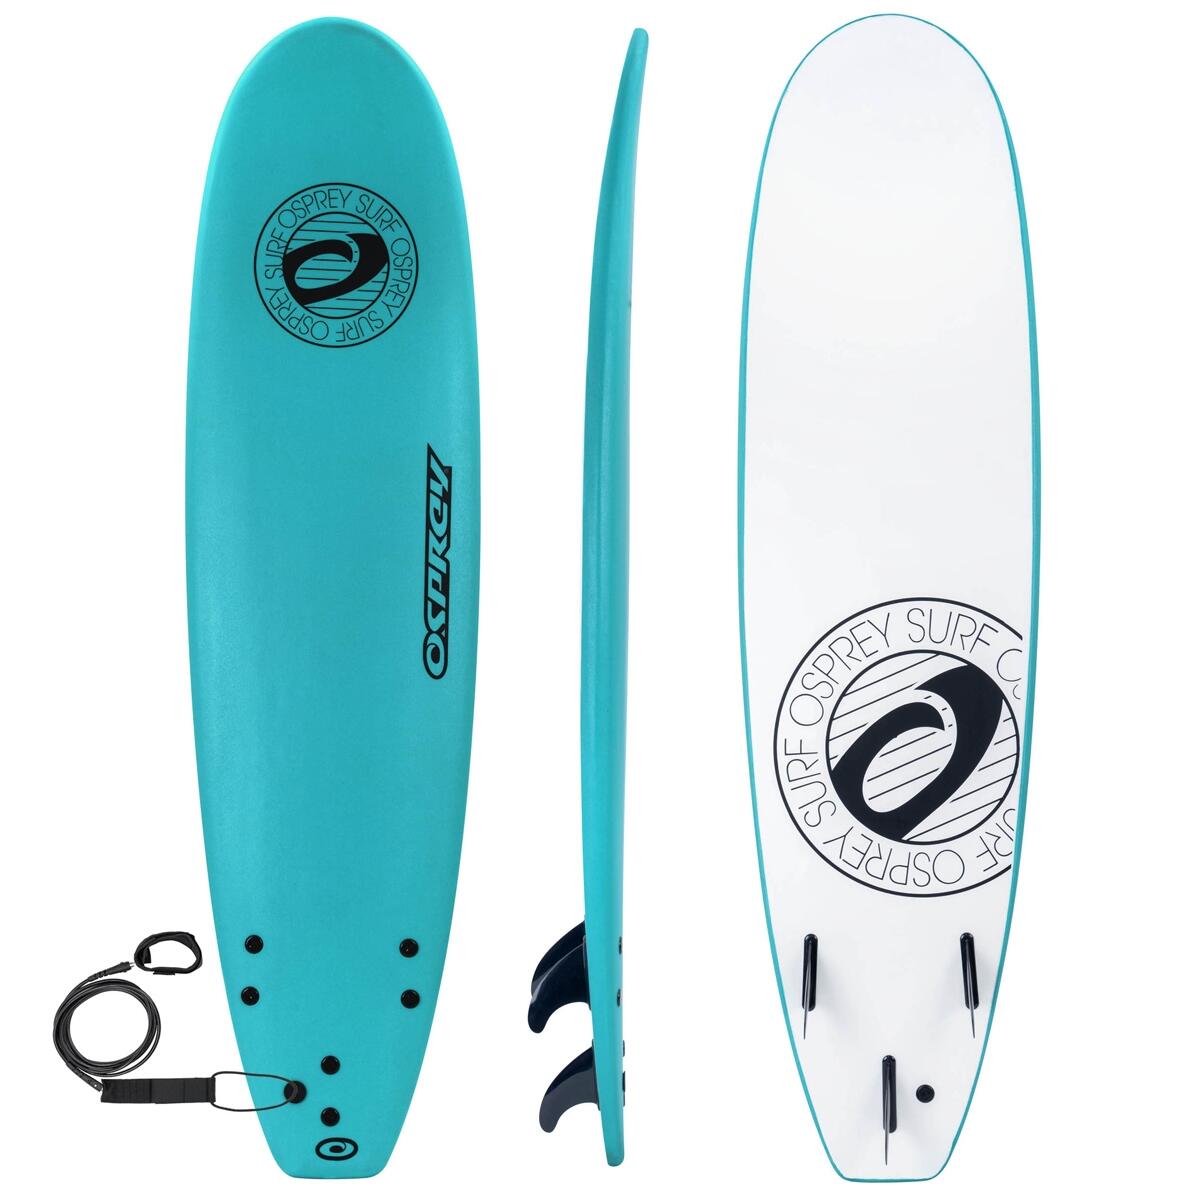 OSPREY ACTION SPORTS XPE Foam Surfboard with Leash and Fins, Mint Design